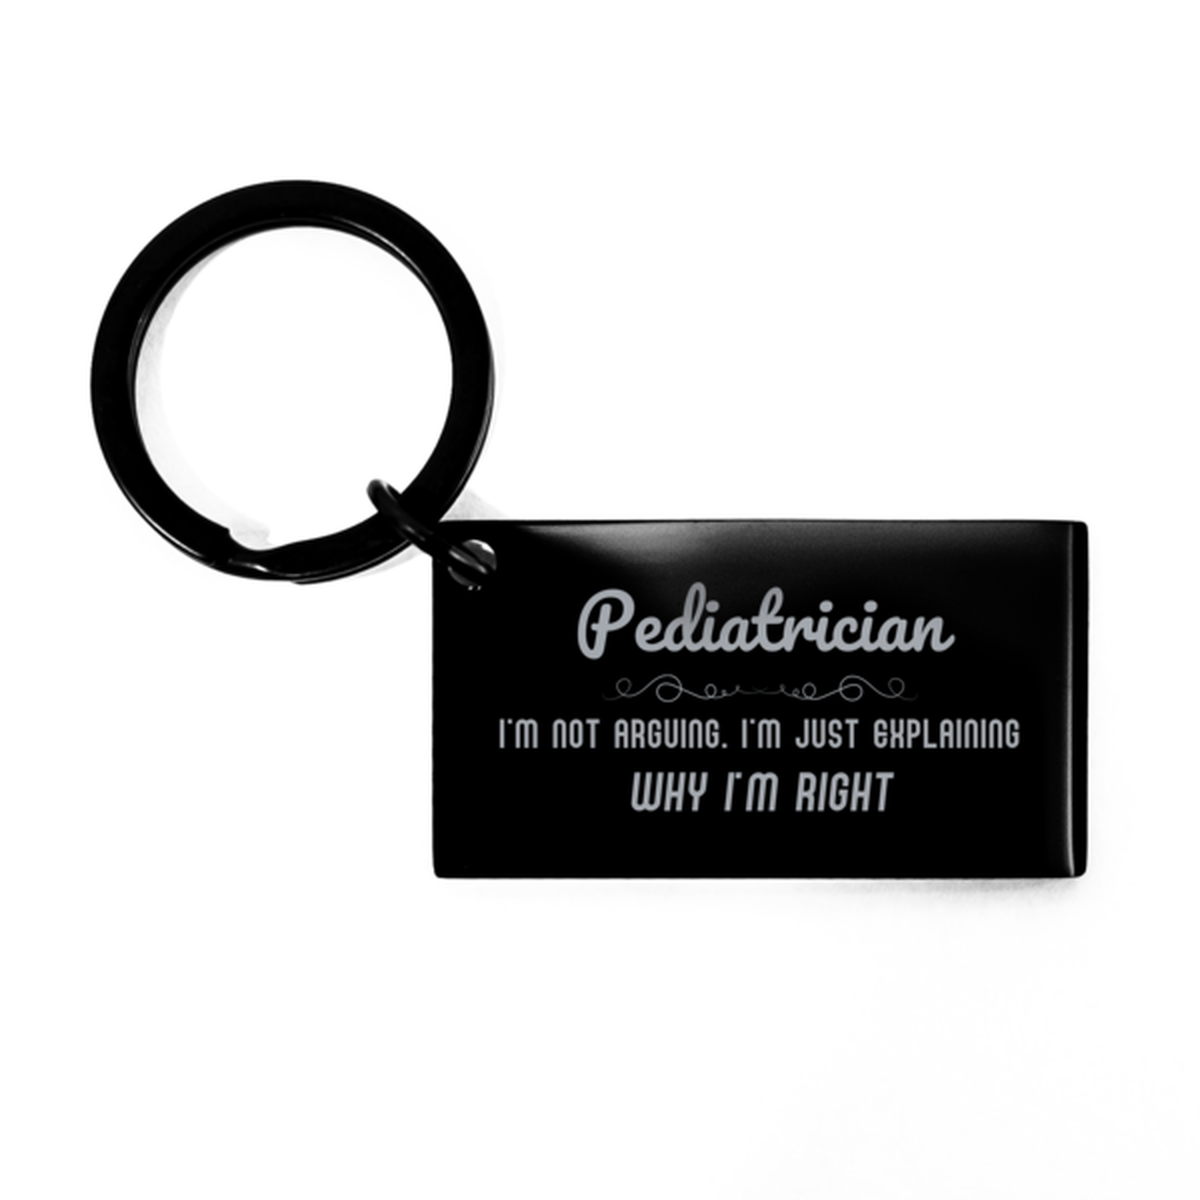 Pediatrician I'm not Arguing. I'm Just Explaining Why I'm RIGHT Keychain, Funny Saying Quote Pediatrician Gifts For Pediatrician Graduation Birthday Christmas Gifts for Men Women Coworker